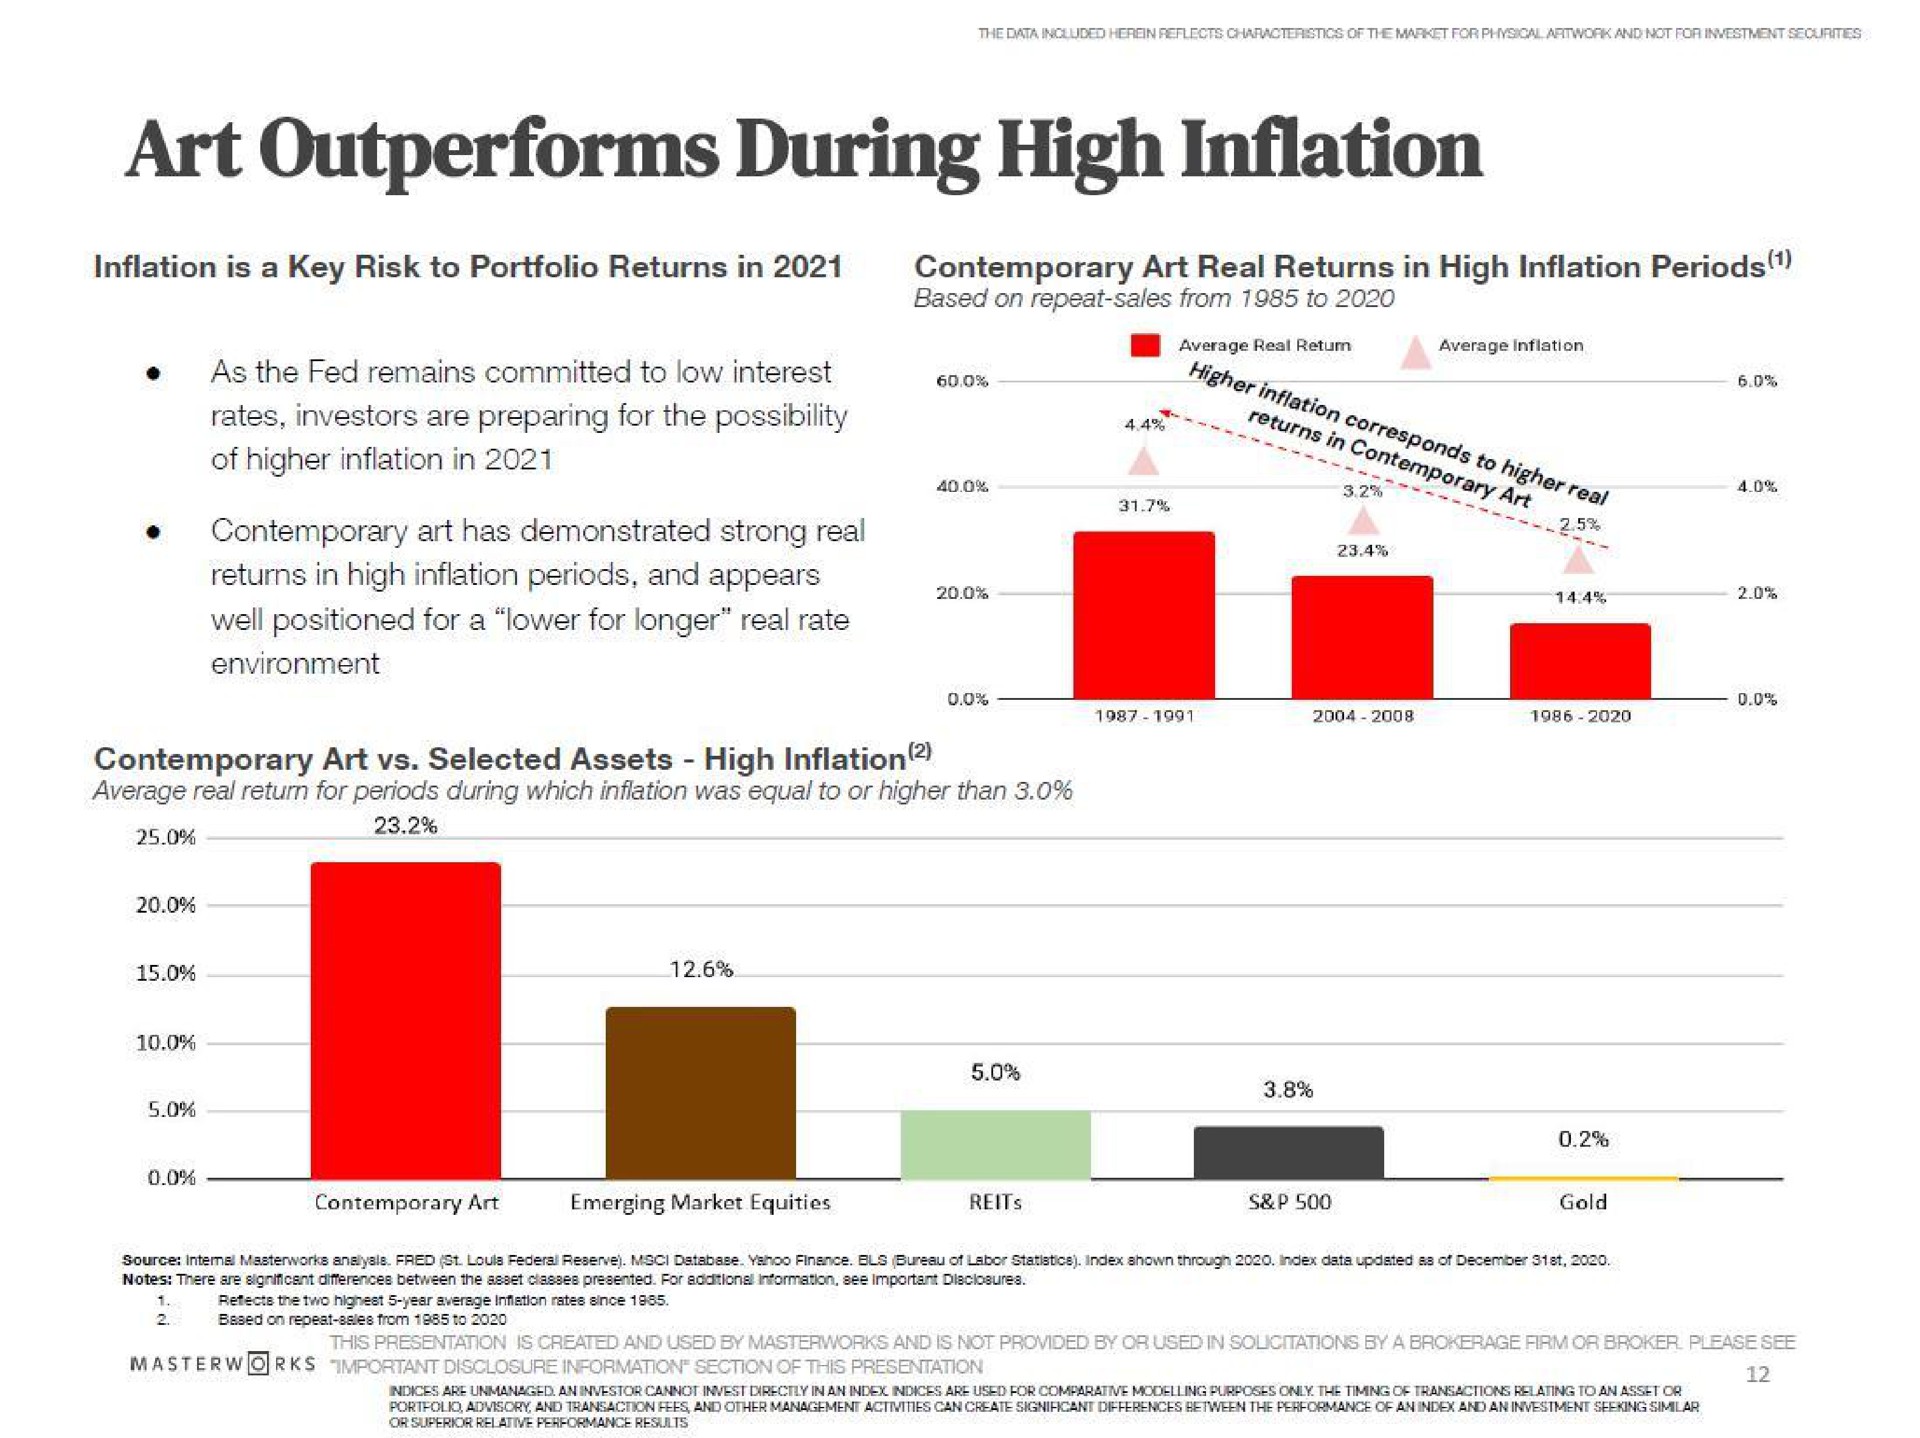 art outperforms during high inflation contemporary art selected assets high inflation | Masterworks